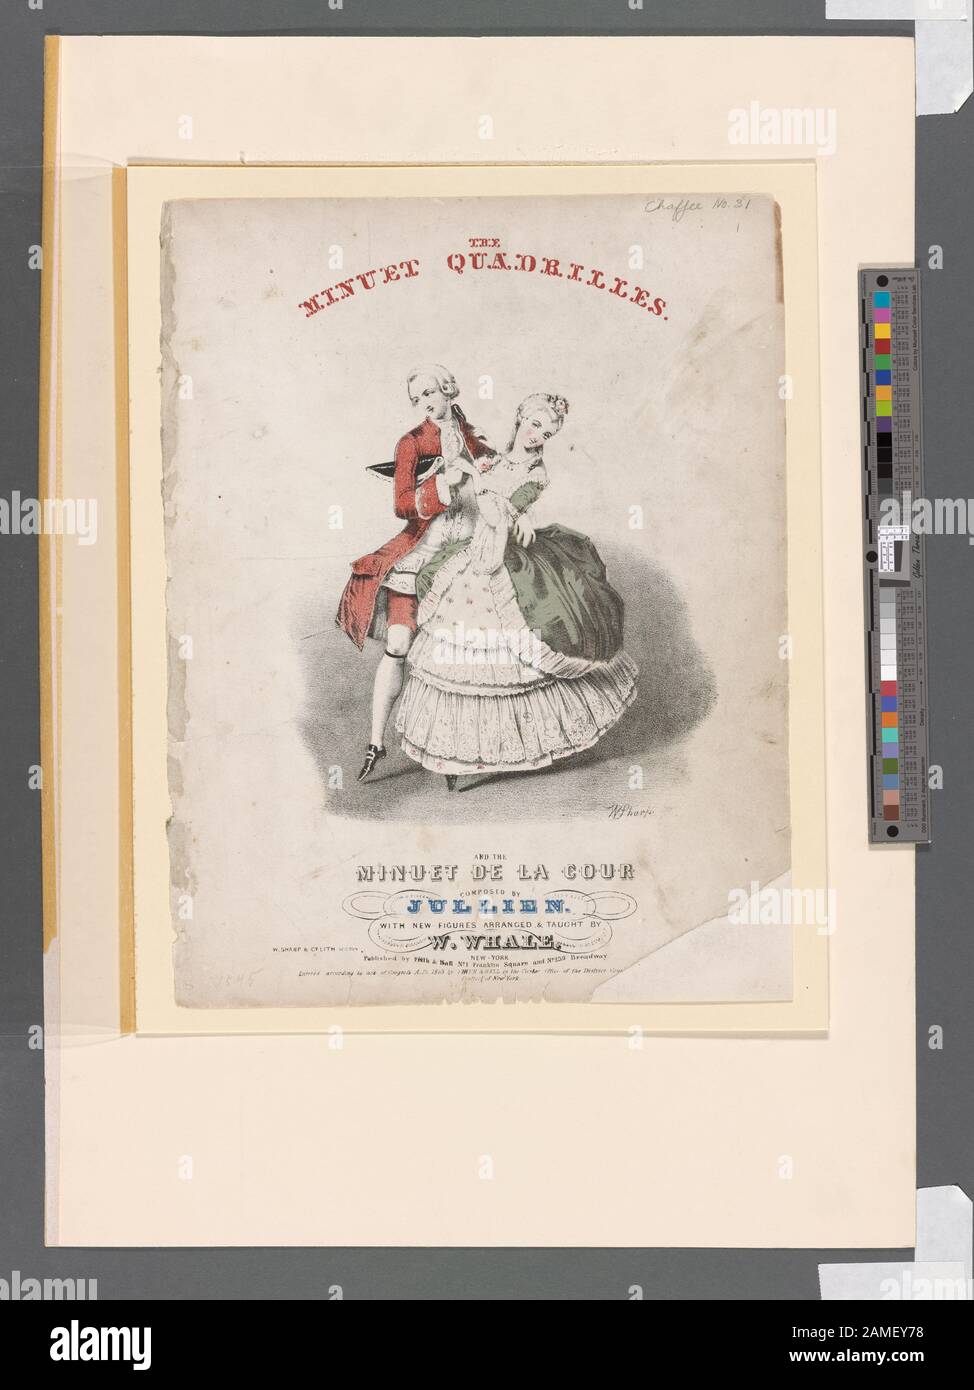 The minuet quadrilles And The minuet de la cour composed by Jullien  Elssler on left in travesty, Cerrito on right, both wearing period costumes from the 17th century. Depicts them dancing together.; The minuet quadrilles. And The minuet de la cour composed by Jullien. Stock Photo